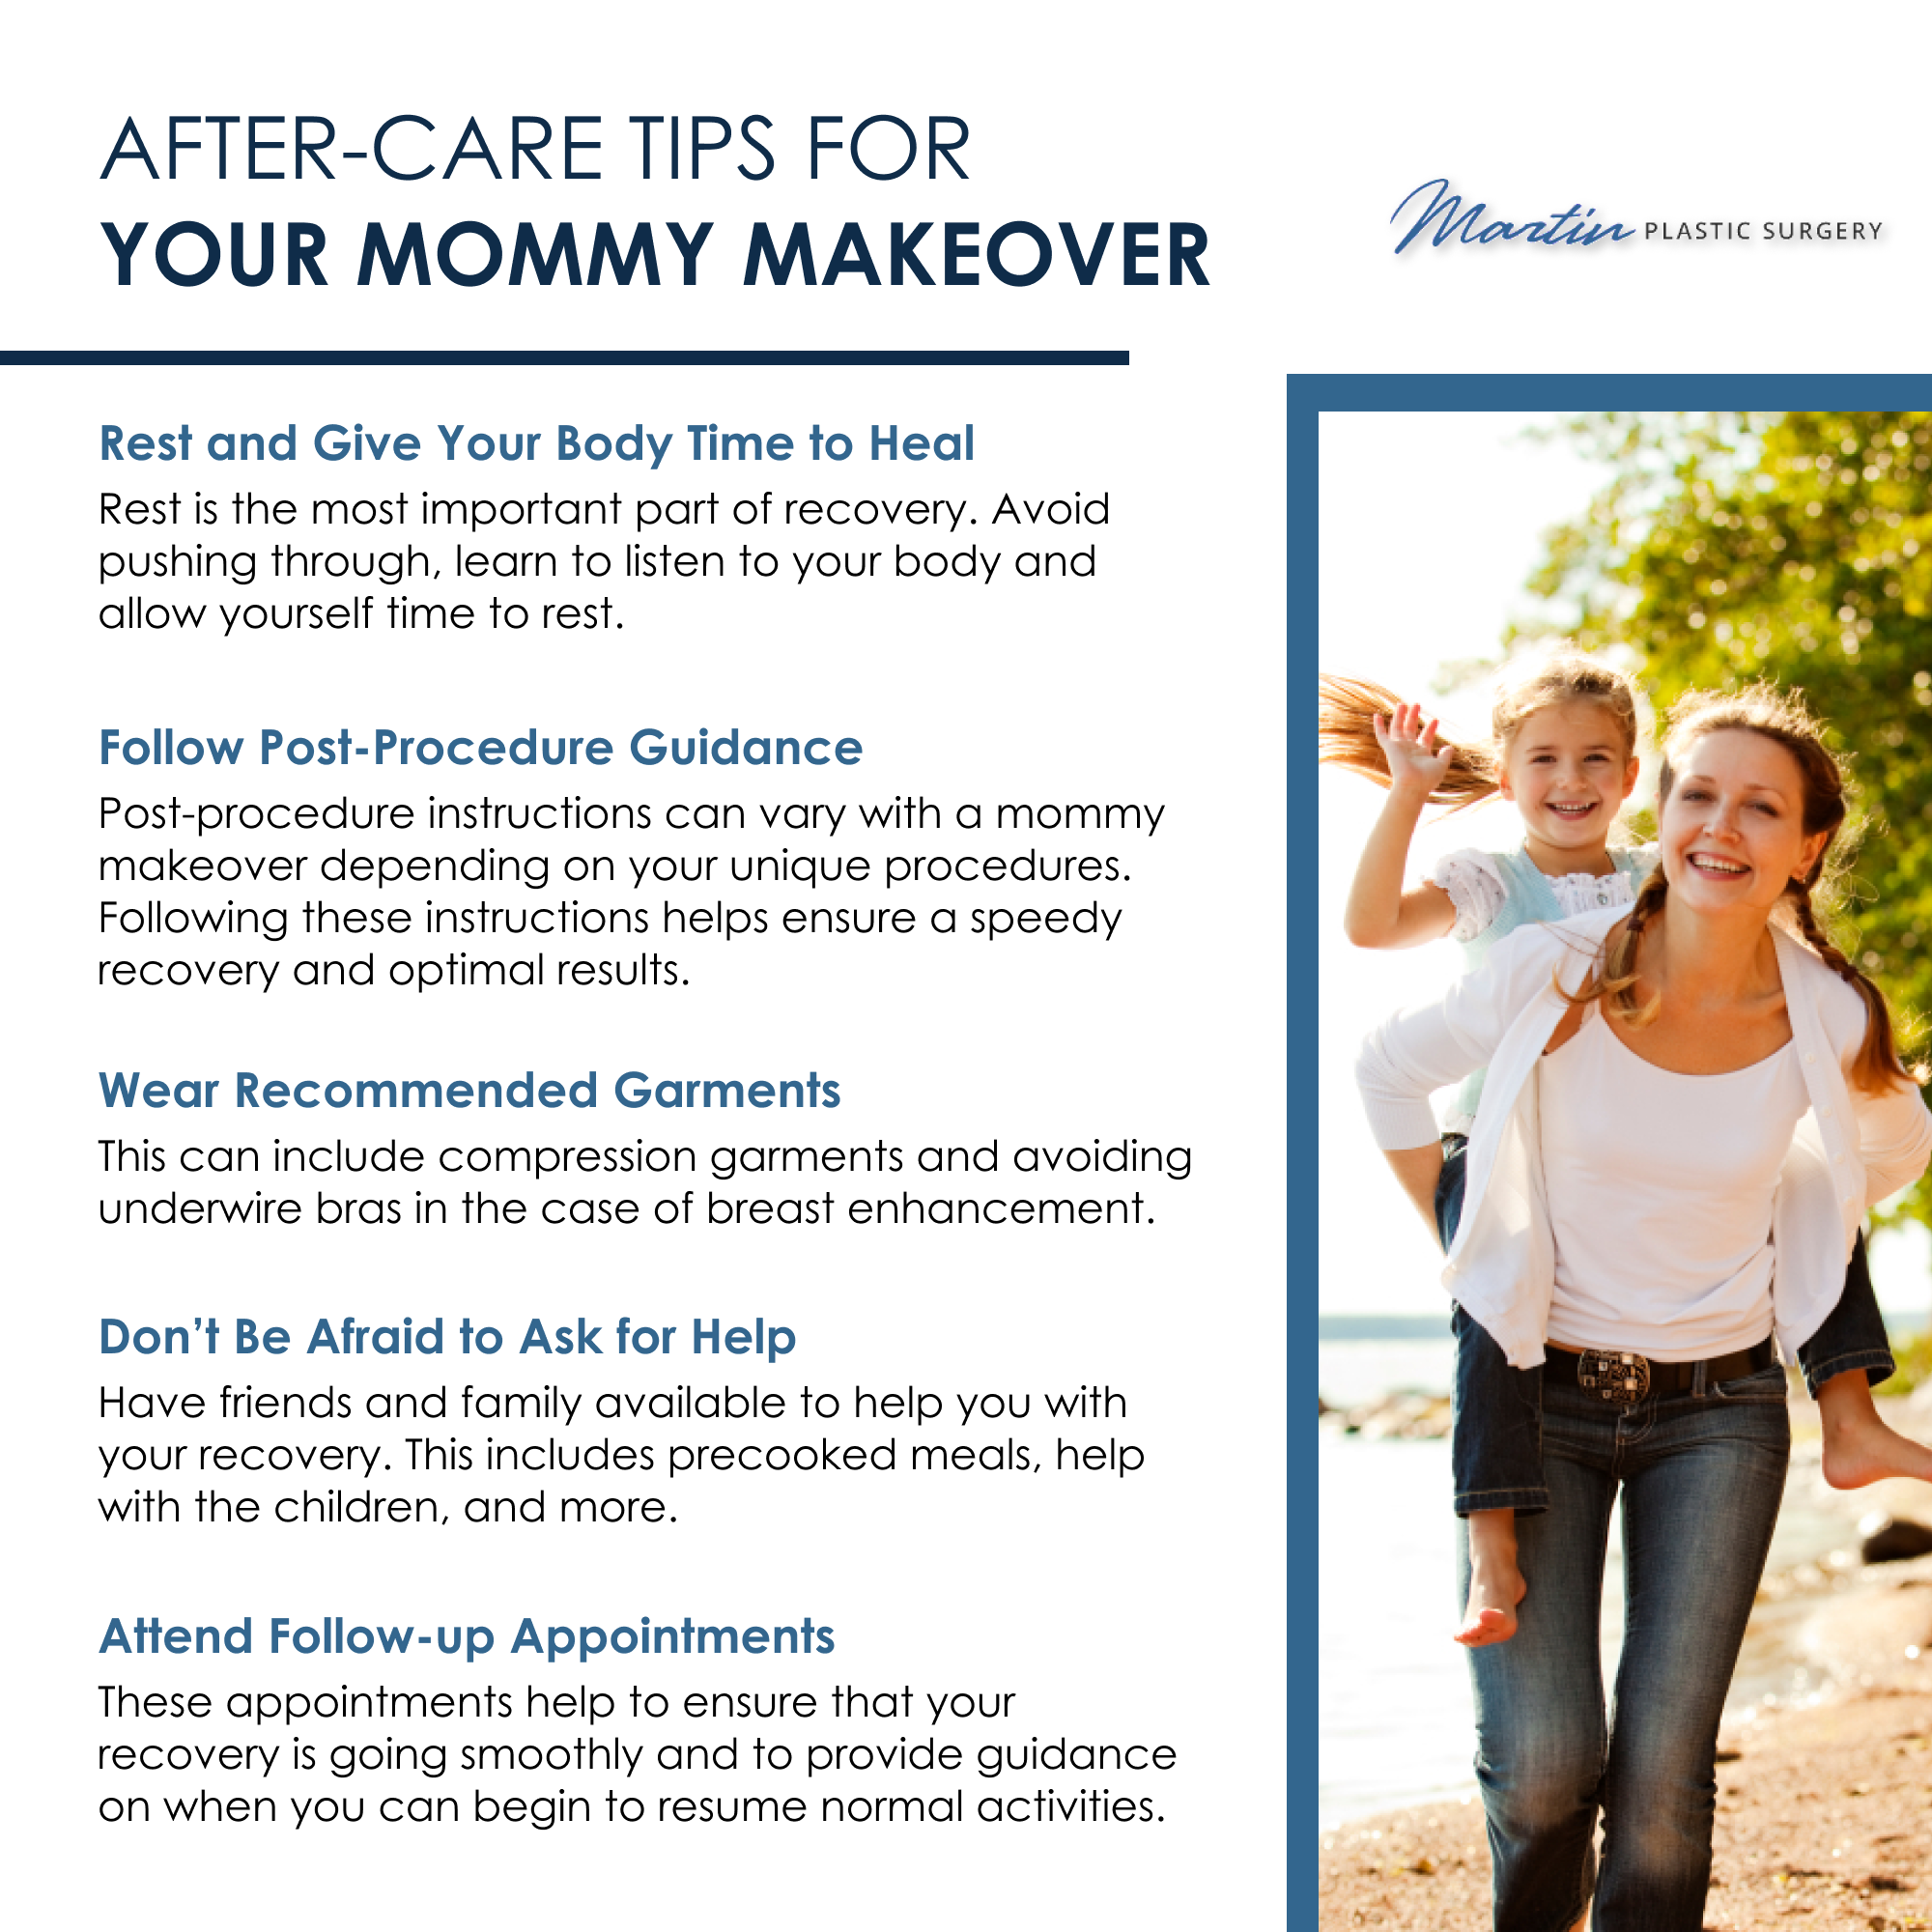 AFTER-CARE TIPS FOR YOUR MOMMY MAKEOVER